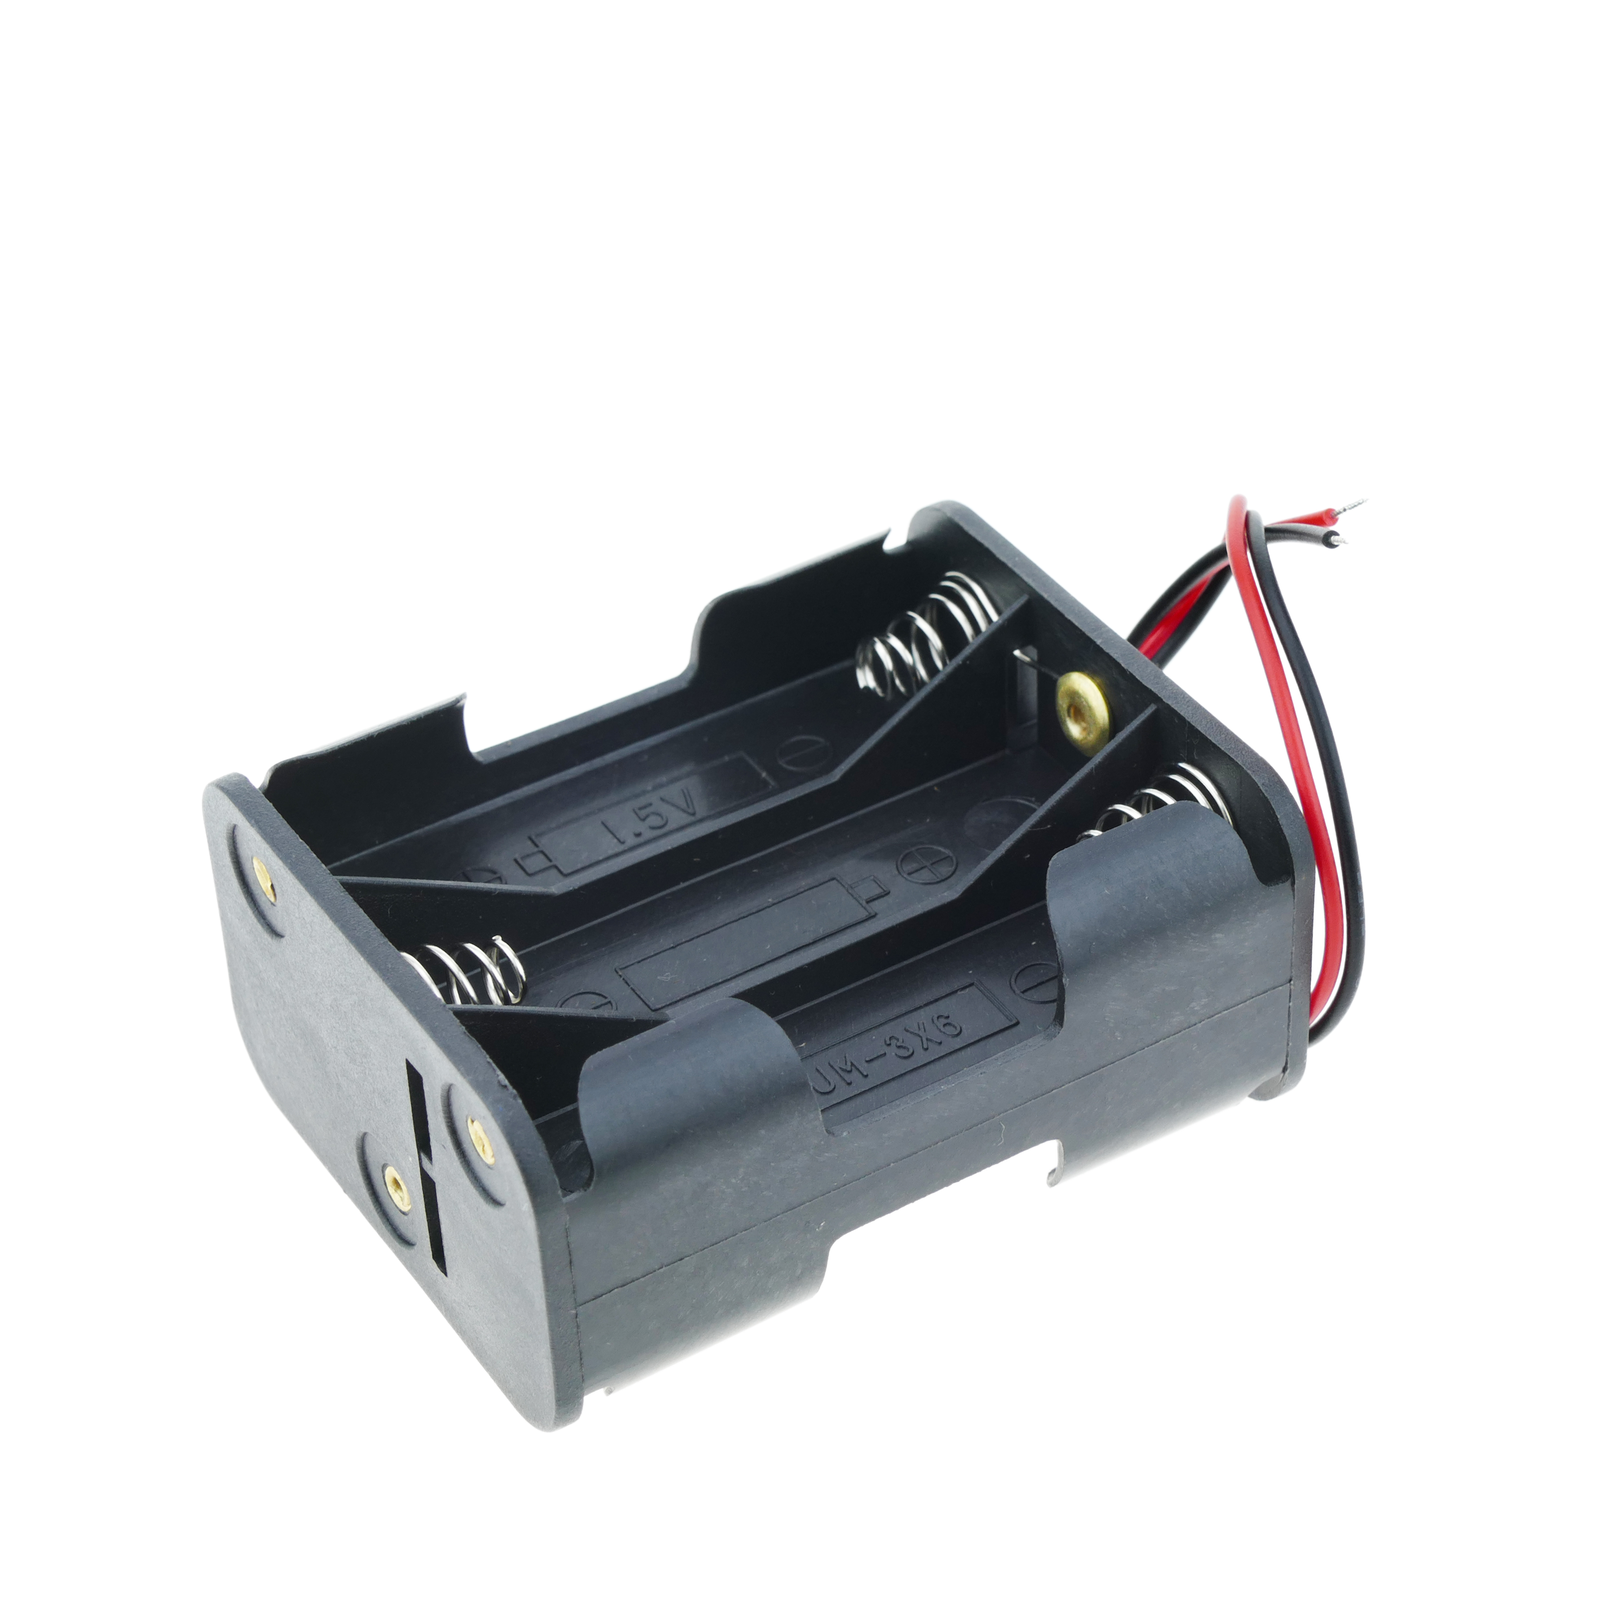 Battery holder for 6 AA 1.5V LR6 - Cablematic